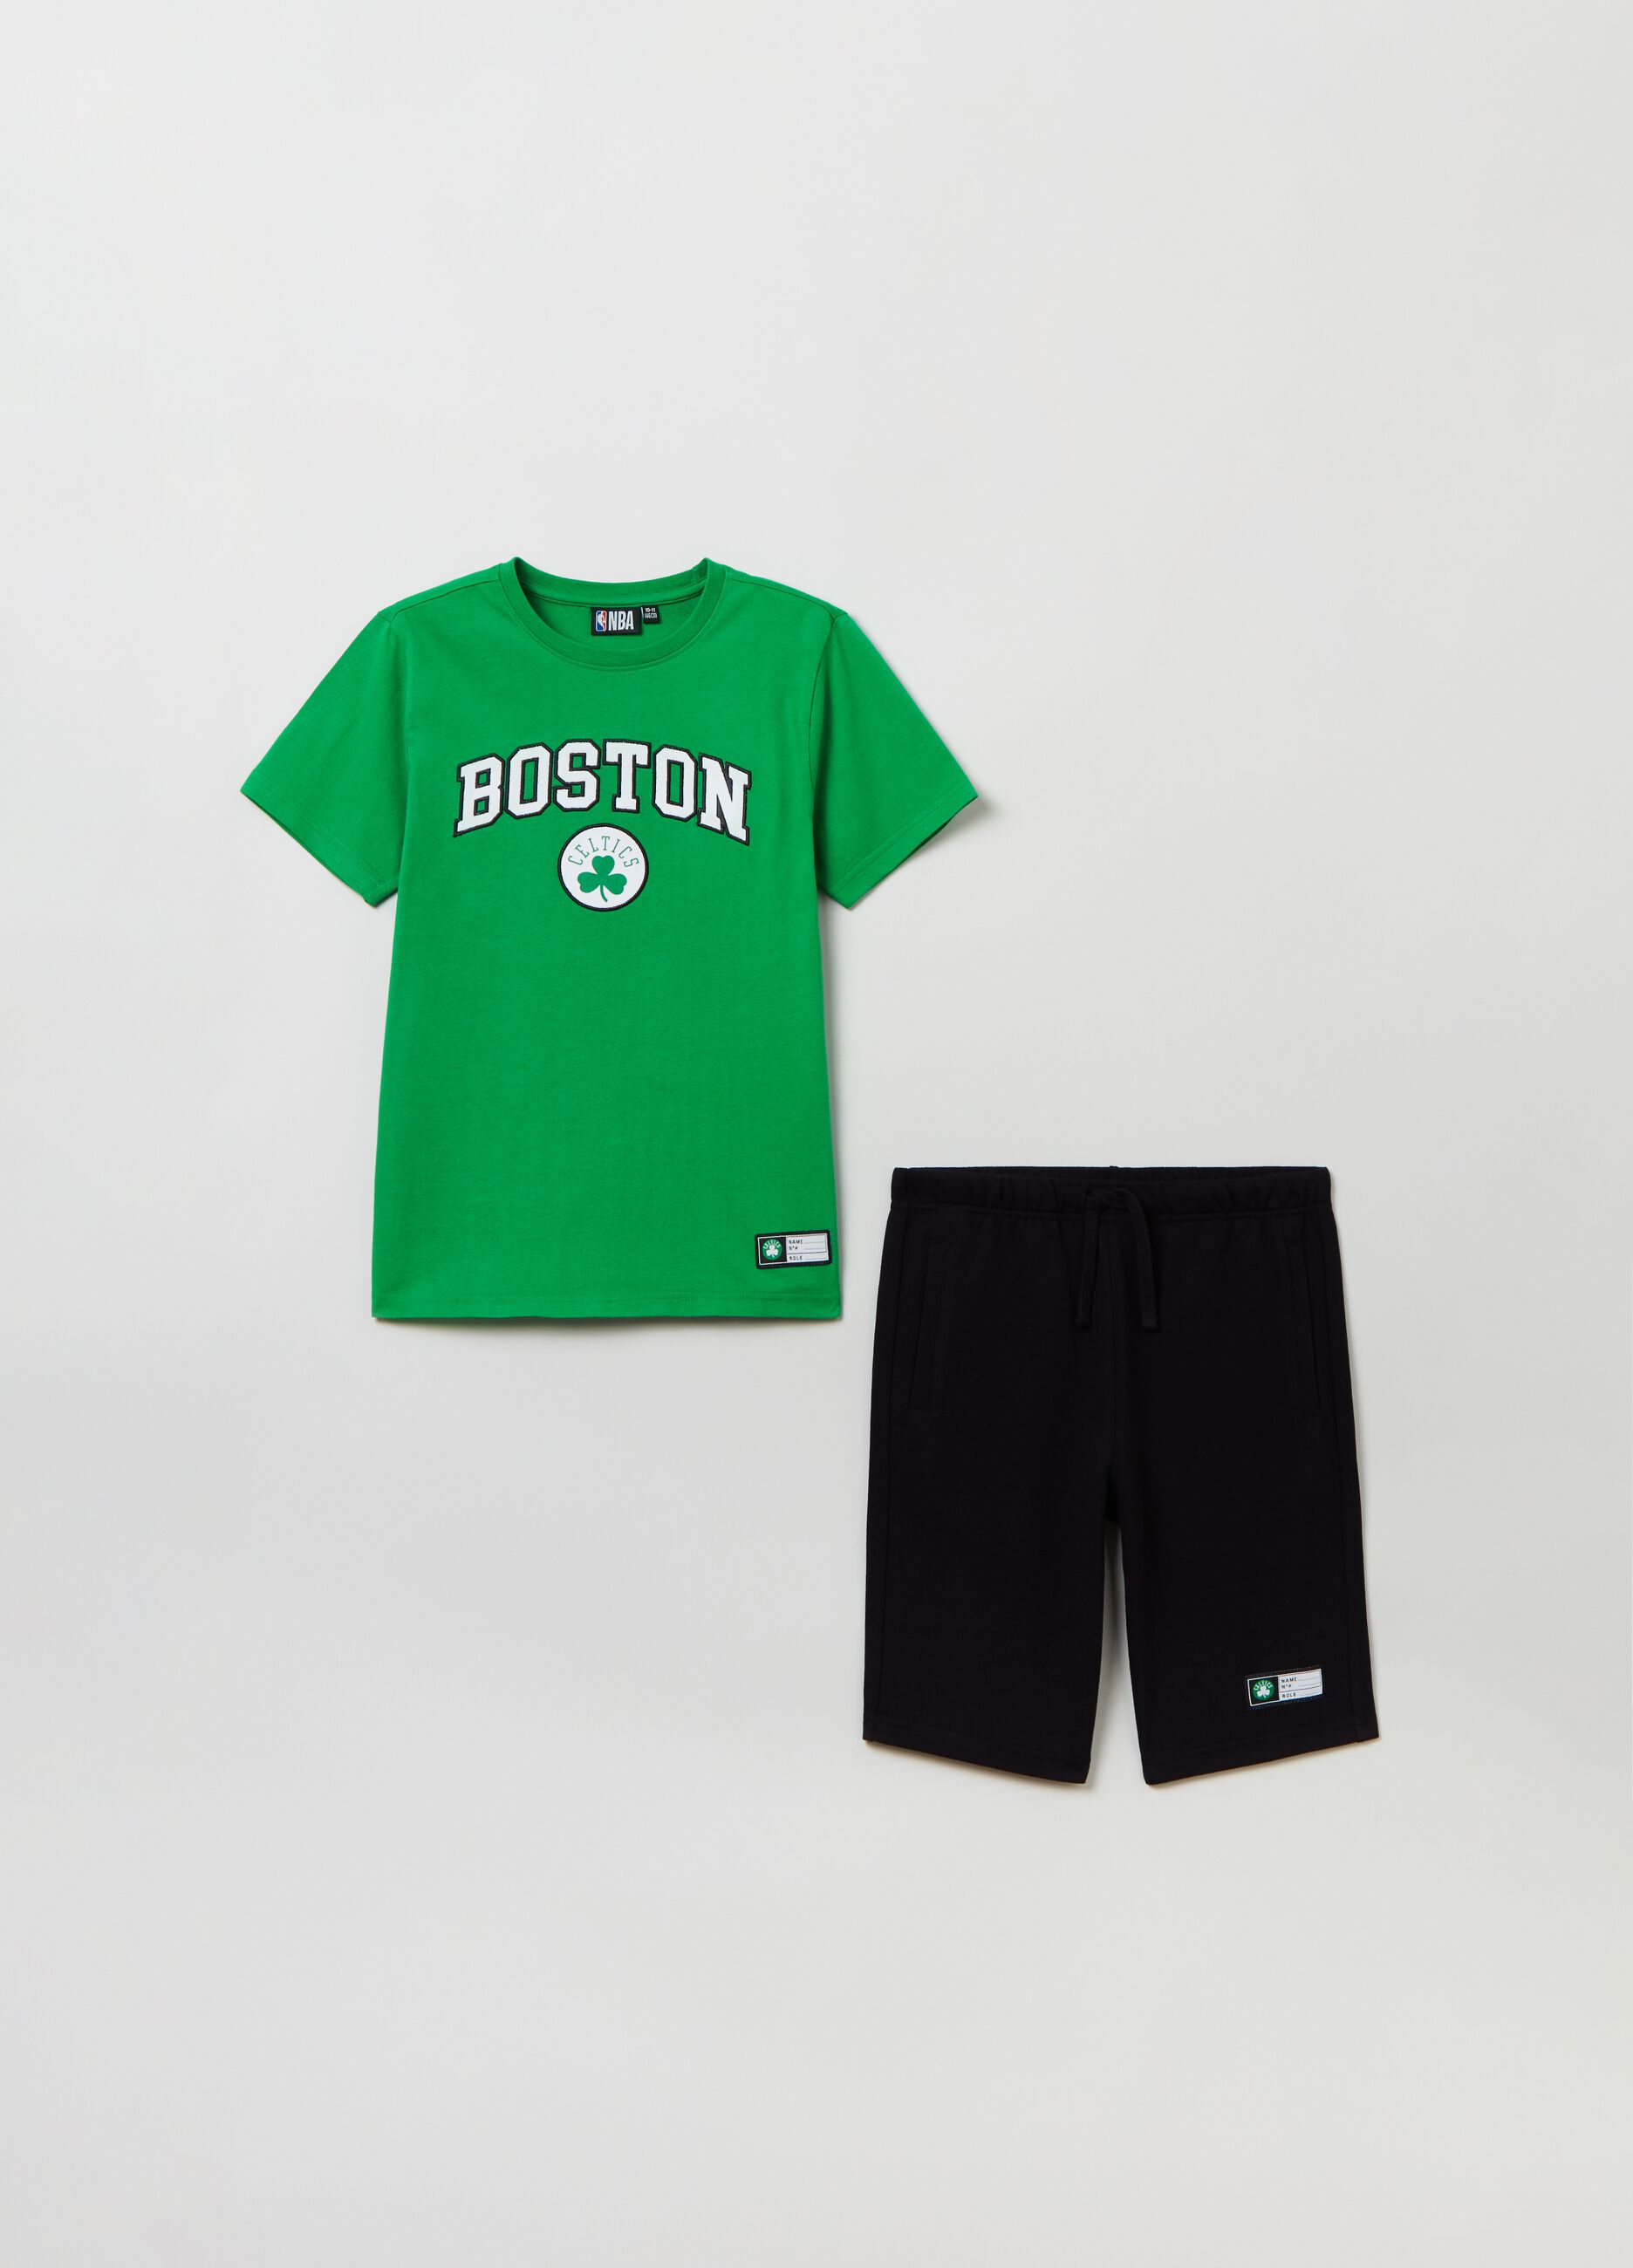 NBA jogging set consisting of T-shirt and shorts in cotton